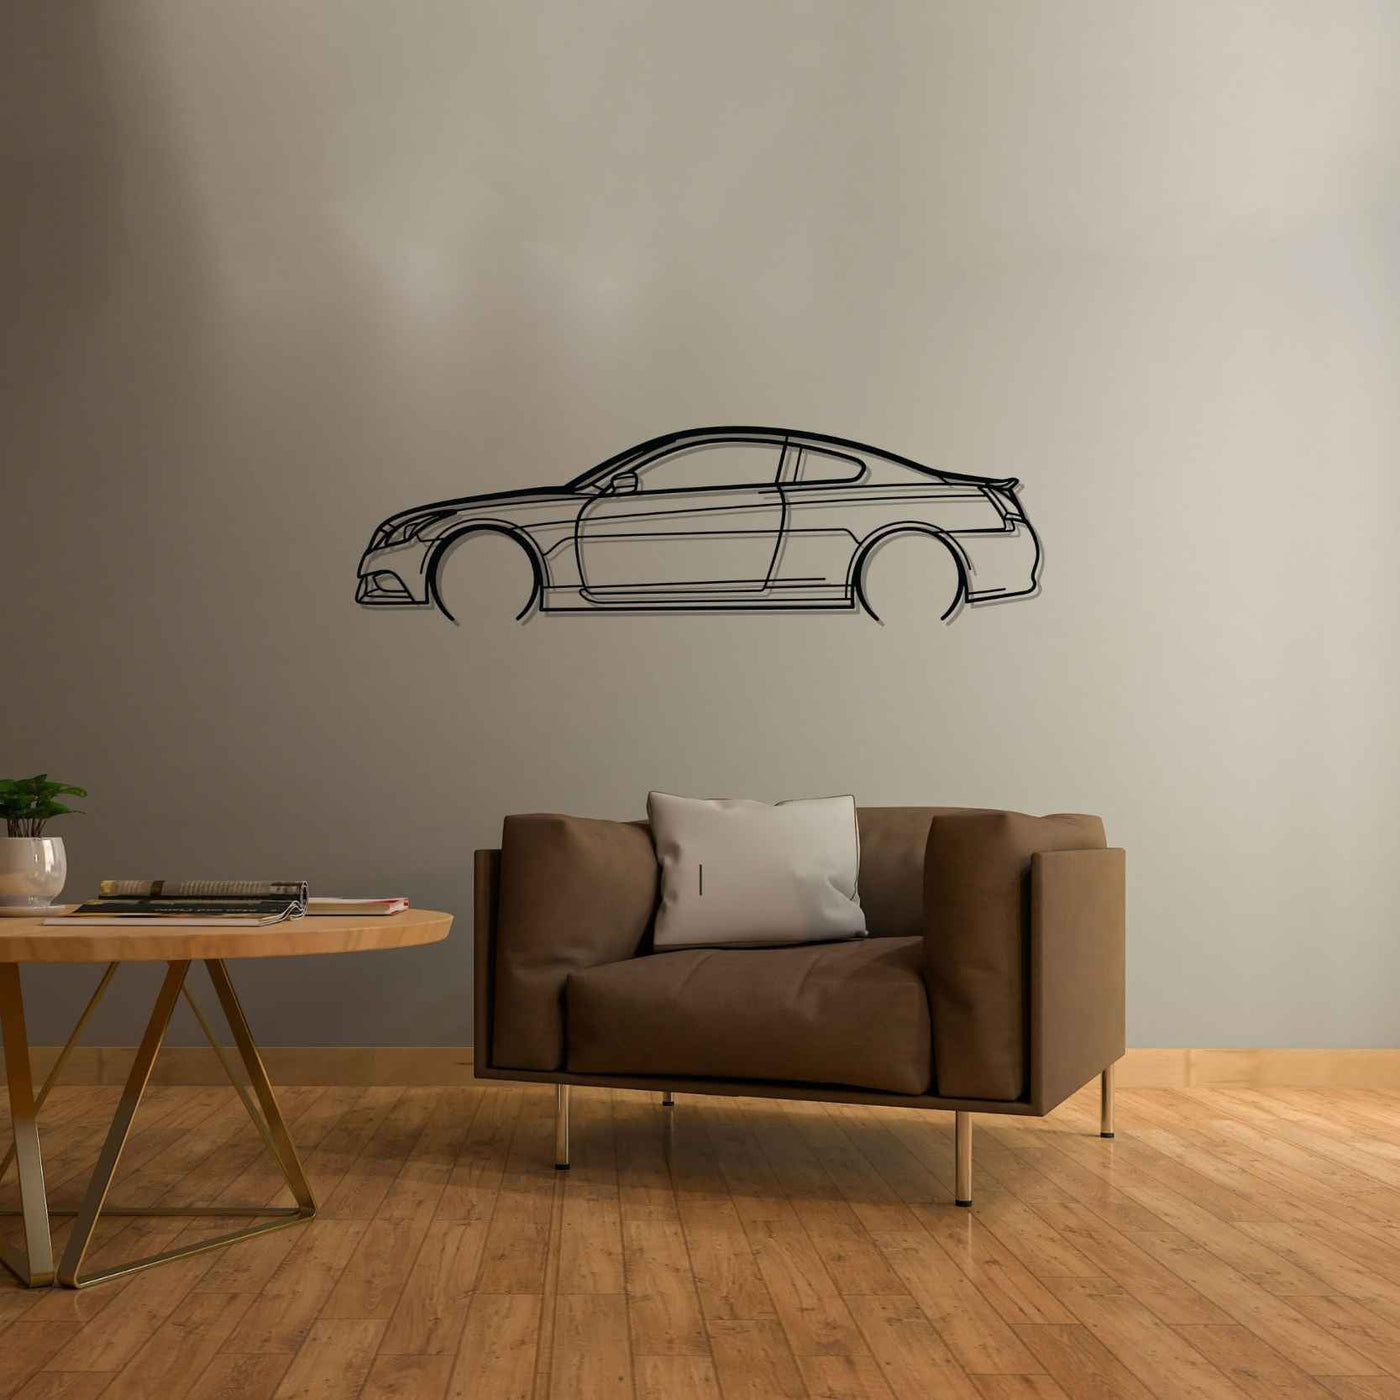 G37S 2008 Detailed Silhouette Metal Wall Art